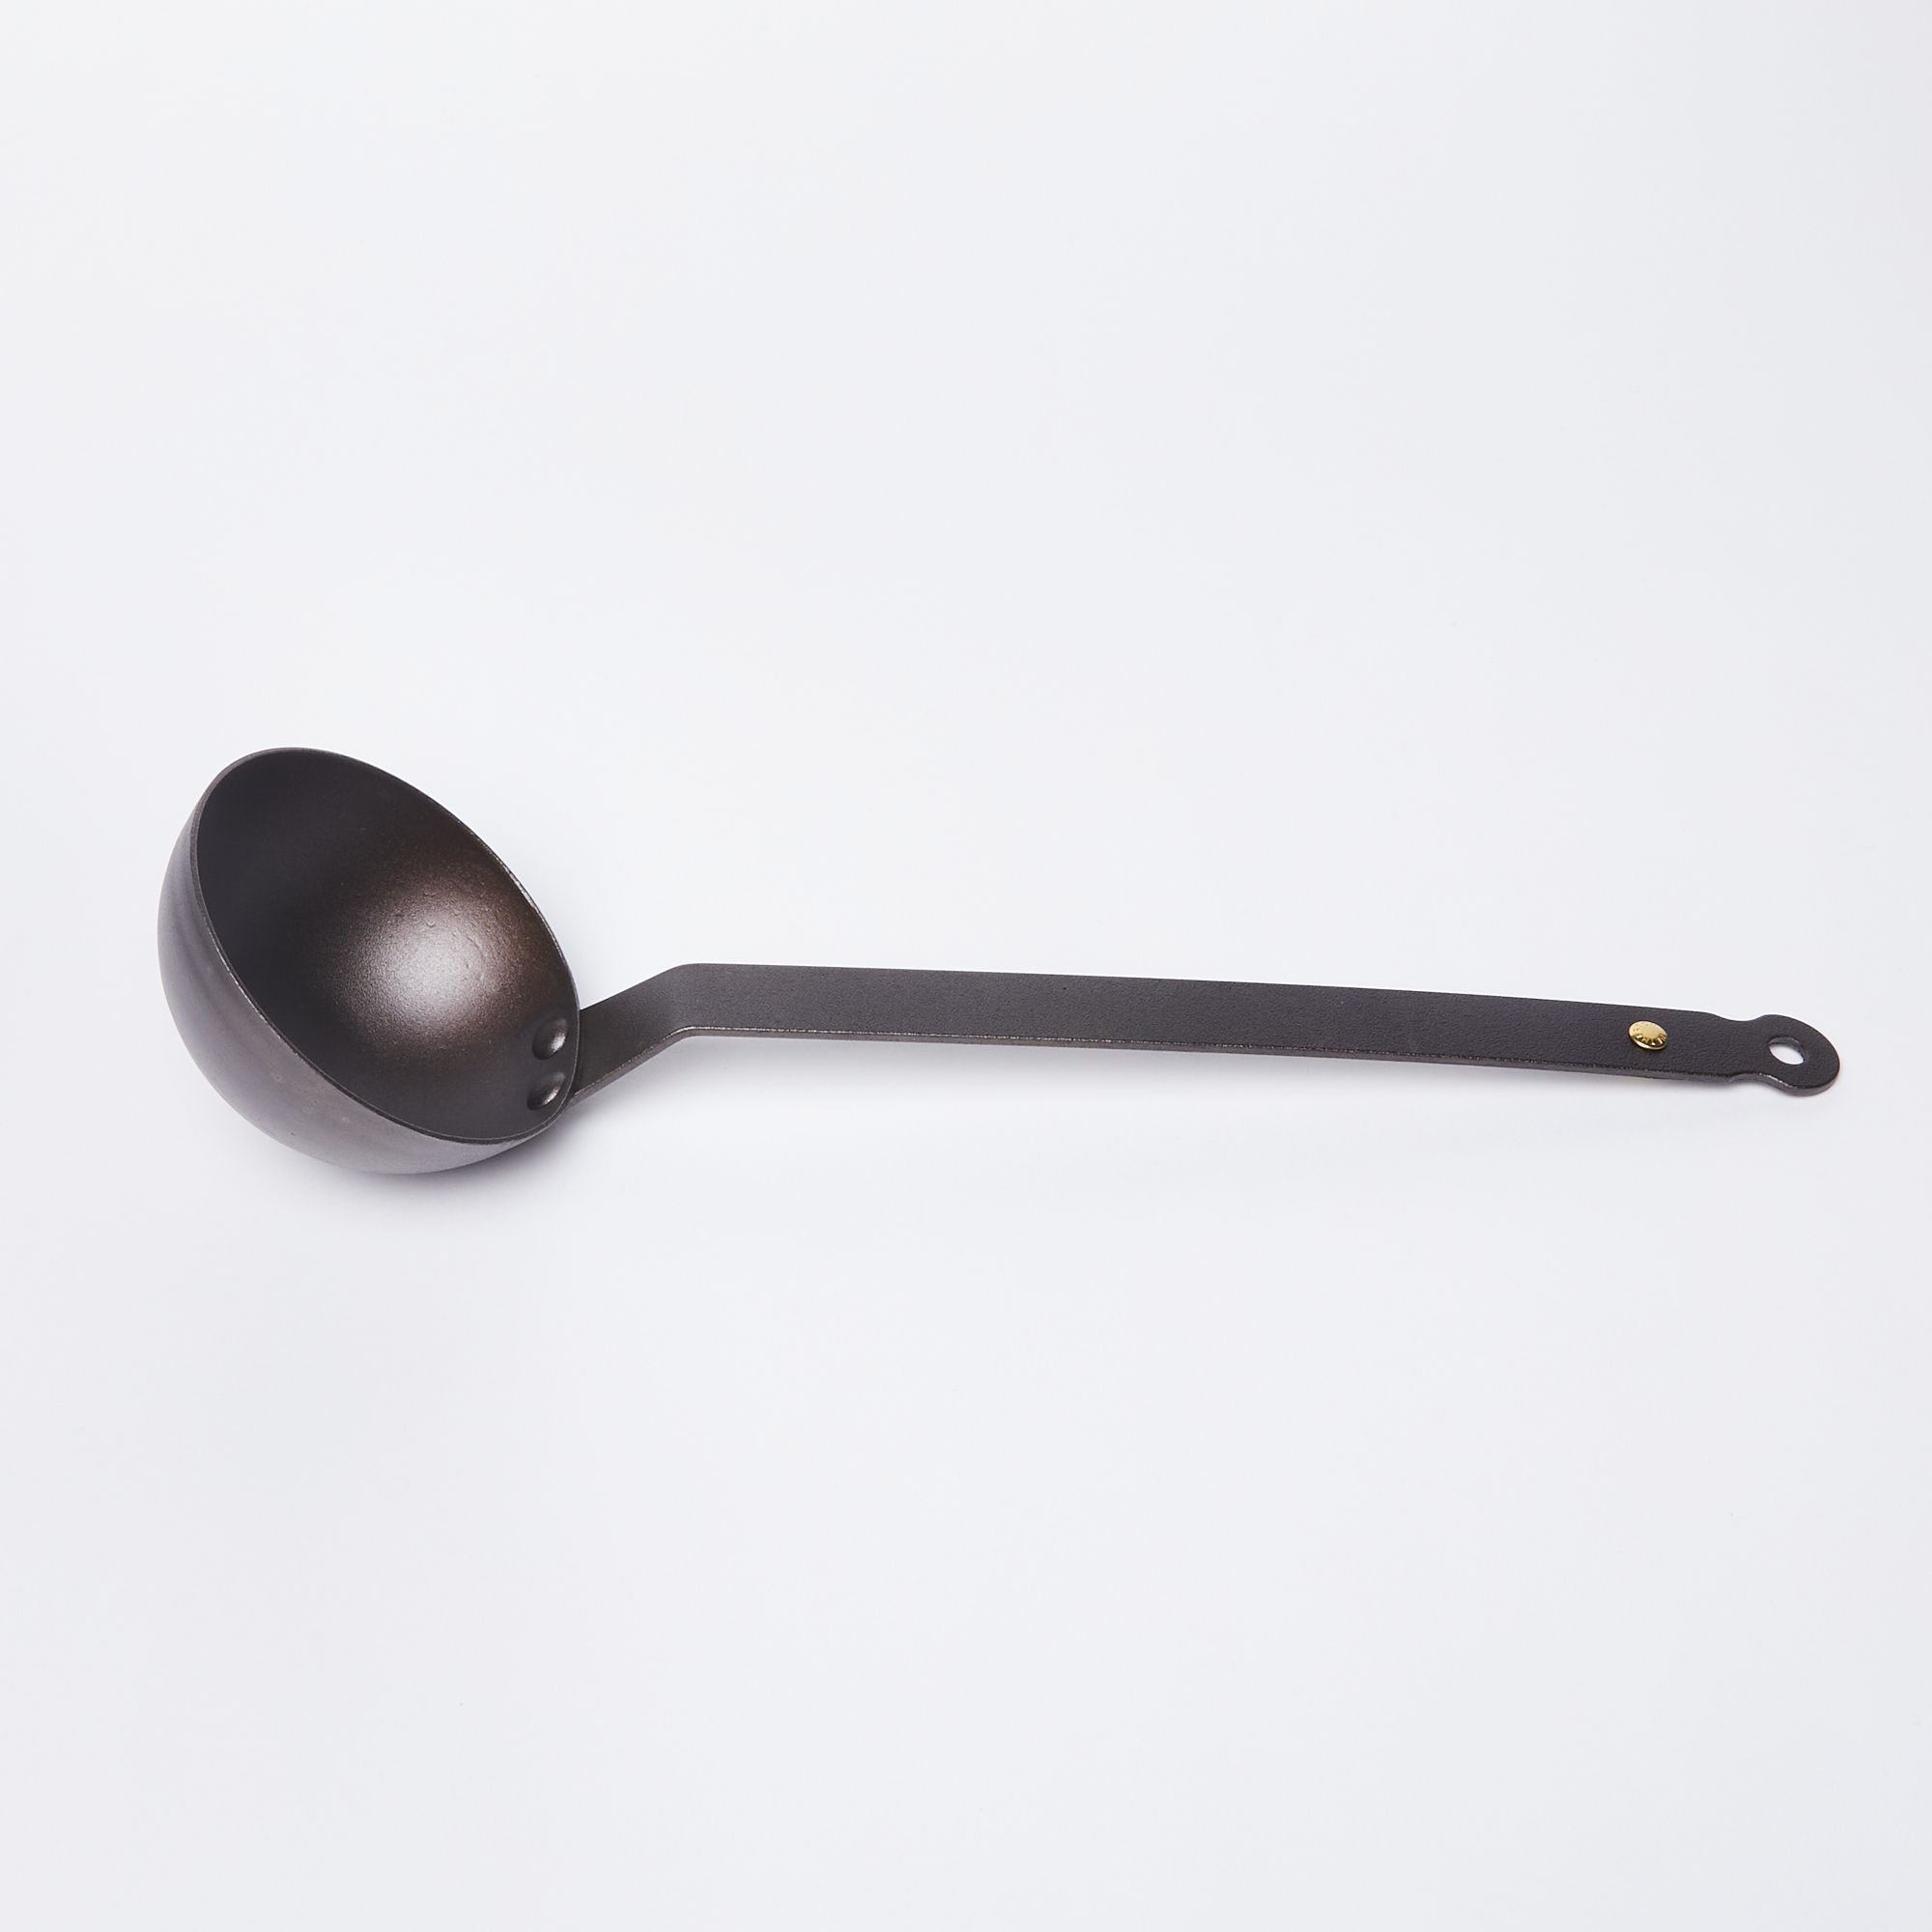 Black metal ladle with cup on the left and a hole at the top of the handle